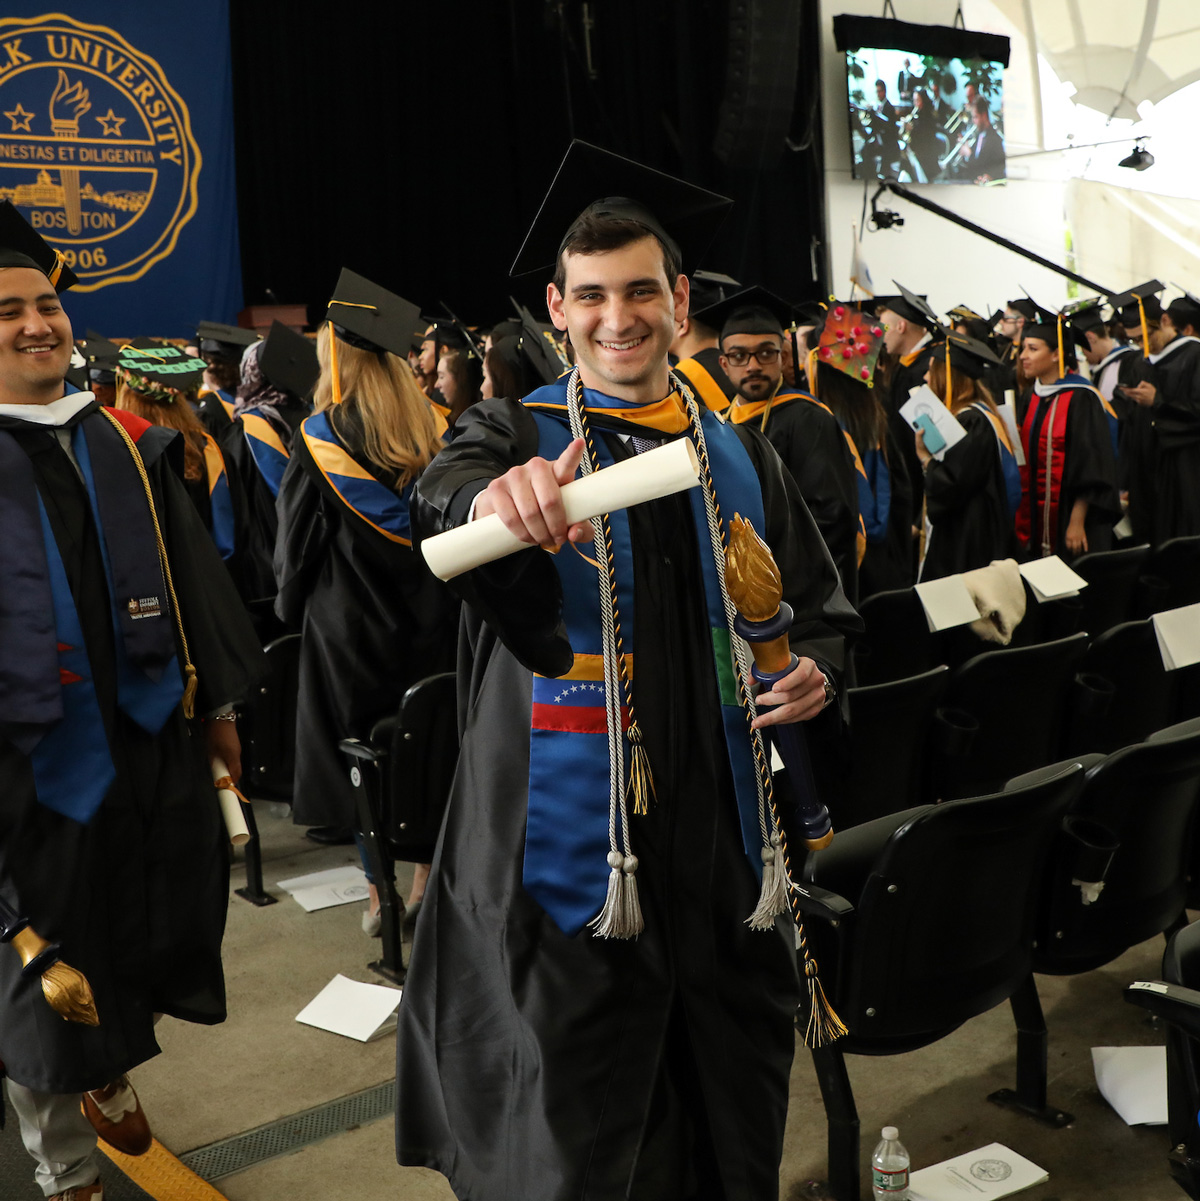 Dan smiling and point toward the camera while walking down the aisle in his cap and gown at Commencement.